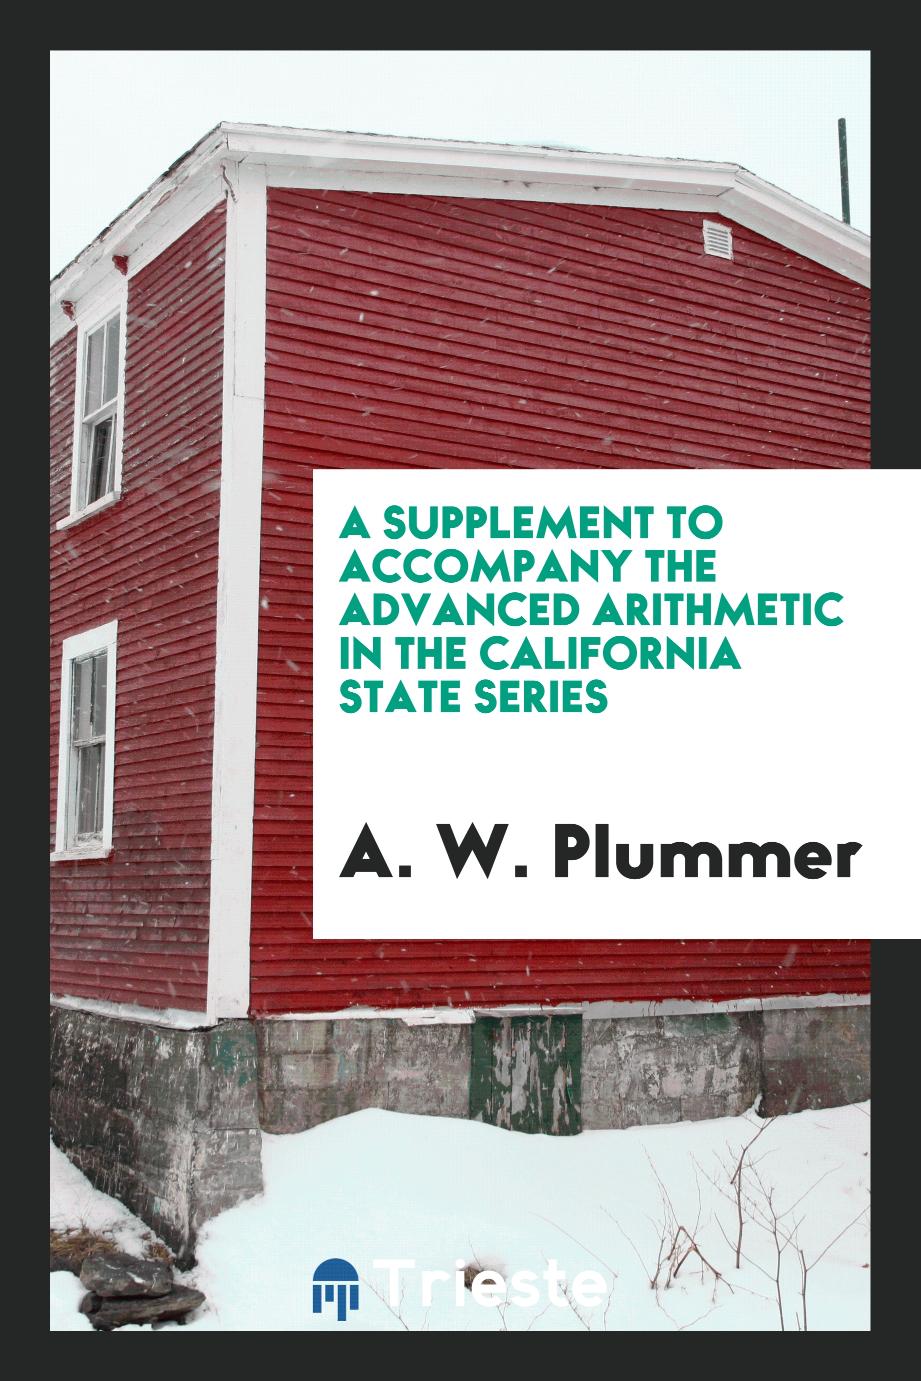 A Supplement to Accompany the Advanced Arithmetic in the California State Series